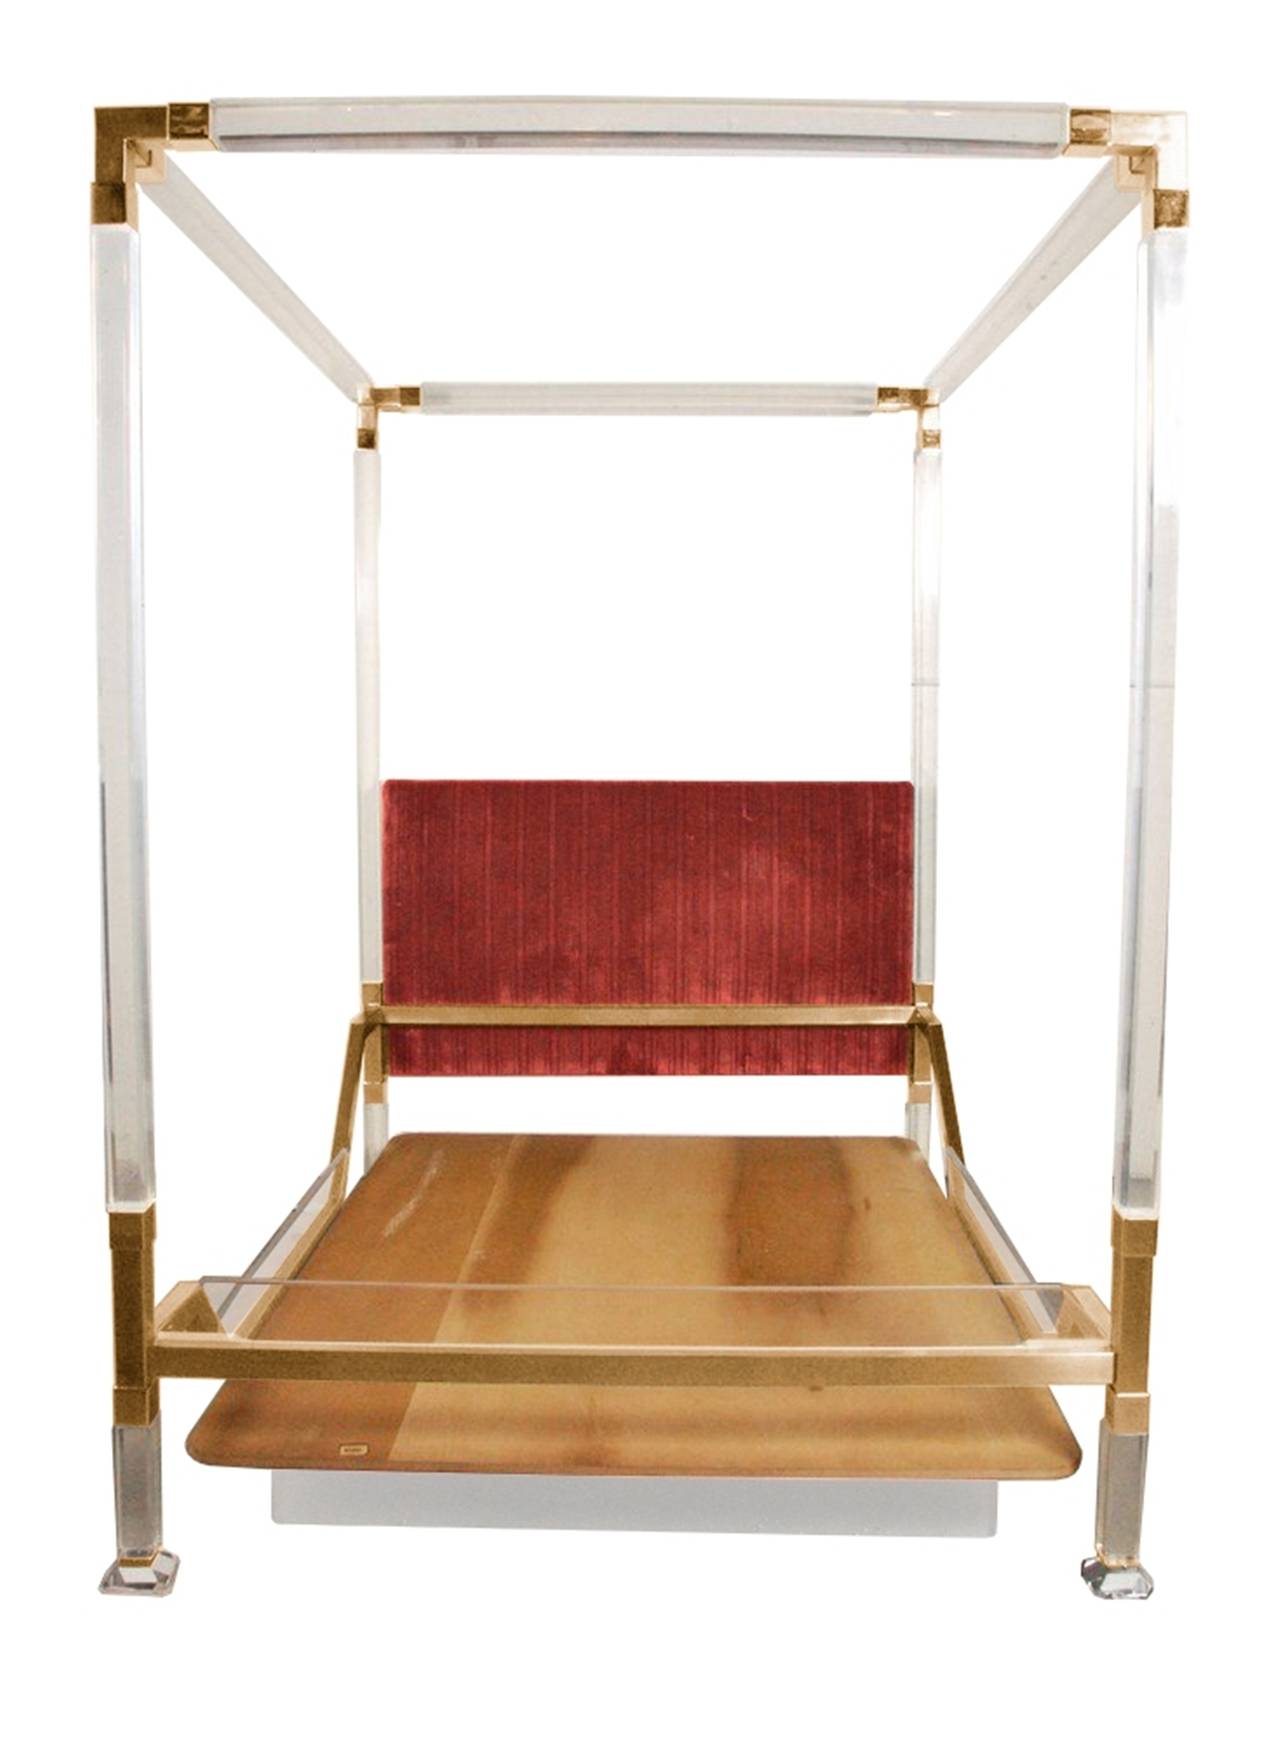 Stunning and rare king-size, four-poster bed/canopy bed in Lucite and brass by Charles Hollis Jones.

The bed was manufactured in the early 1970s and is vintage condition with some rusting on the brass and mild wear on the Lucite.

The piece is